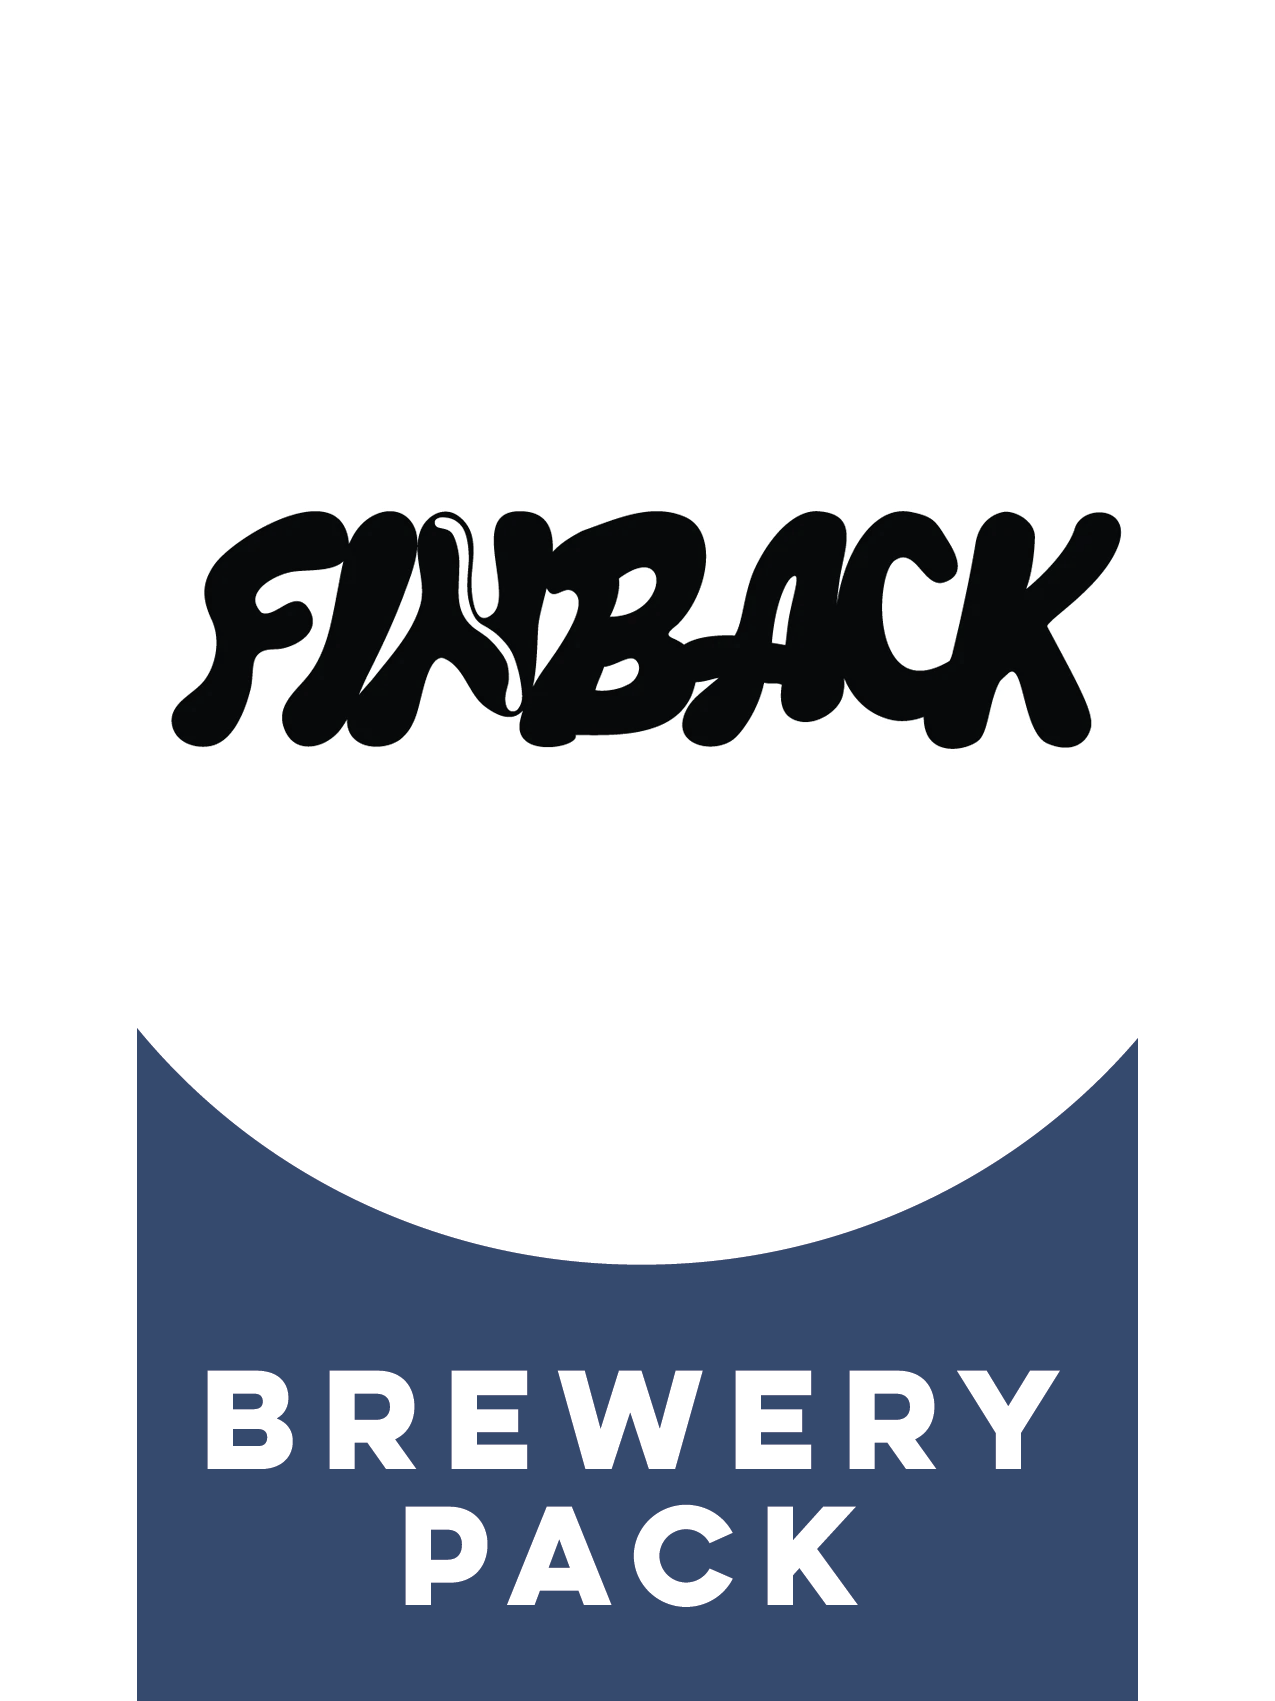 -Finback- Finback Brewery Pack-Packs & Cases- Only @ Beer Republic - The best online beer store for American & Canadian craft beer - Buy beer online from the USA and Canada - Bier online kopen - Amerikaans bier kopen - Craft beer store - Craft beer kopen - Amerikanisch bier kaufen - Bier online kaufen - Acheter biere online - IPA - Stout - Porter - New England IPA - Hazy IPA - Imperial Stout - Barrel Aged - Barrel Aged Imperial Stout - Brown - Dark beer - Blond - Blonde - Pilsner - Lager - Wheat - Weizen - 